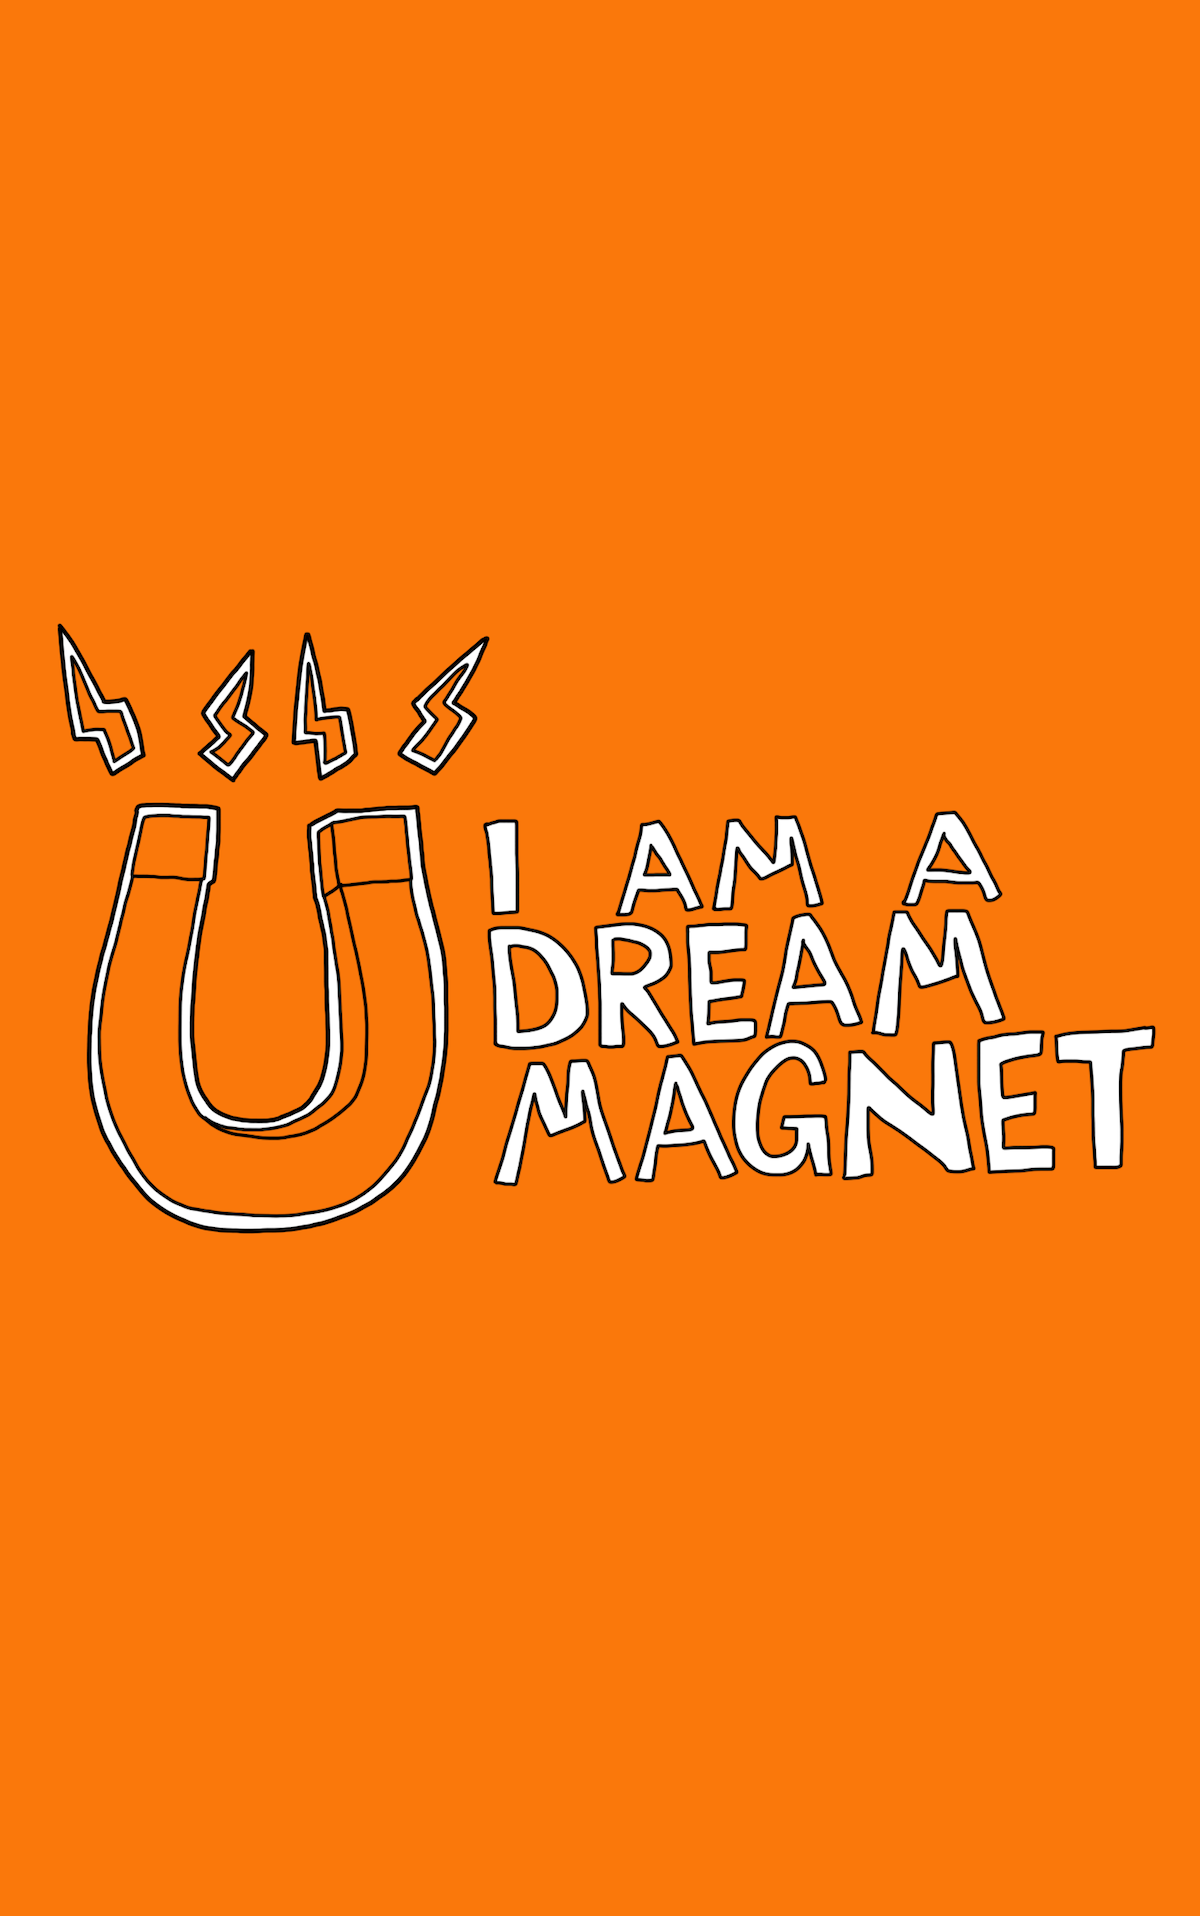 On being a dream magnet